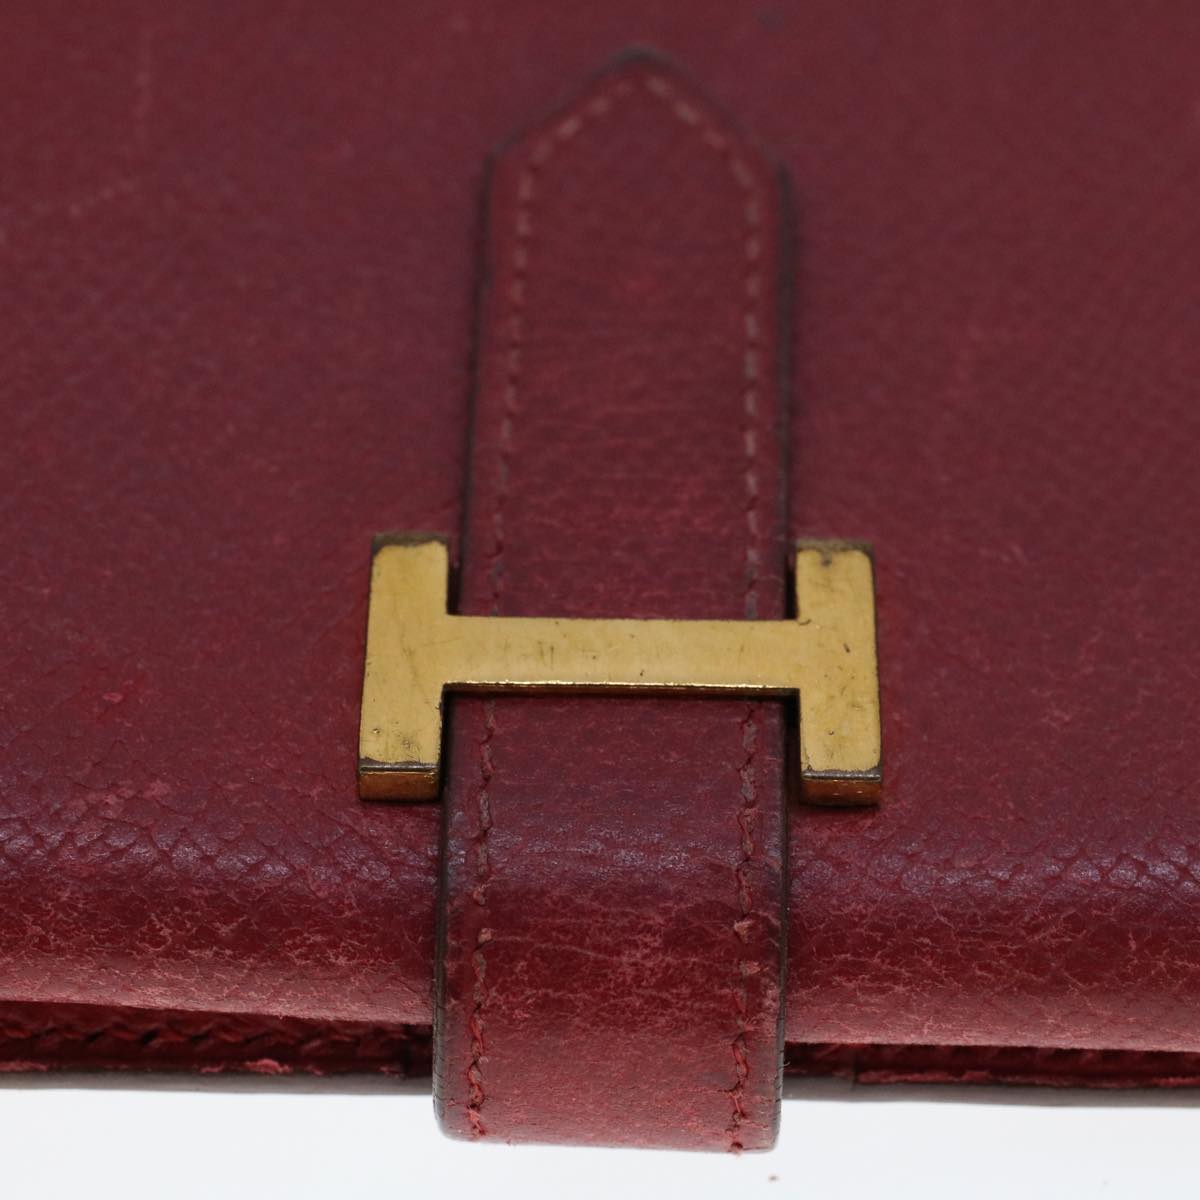 HERMES Bean Wallet Leather Red Auth yb127